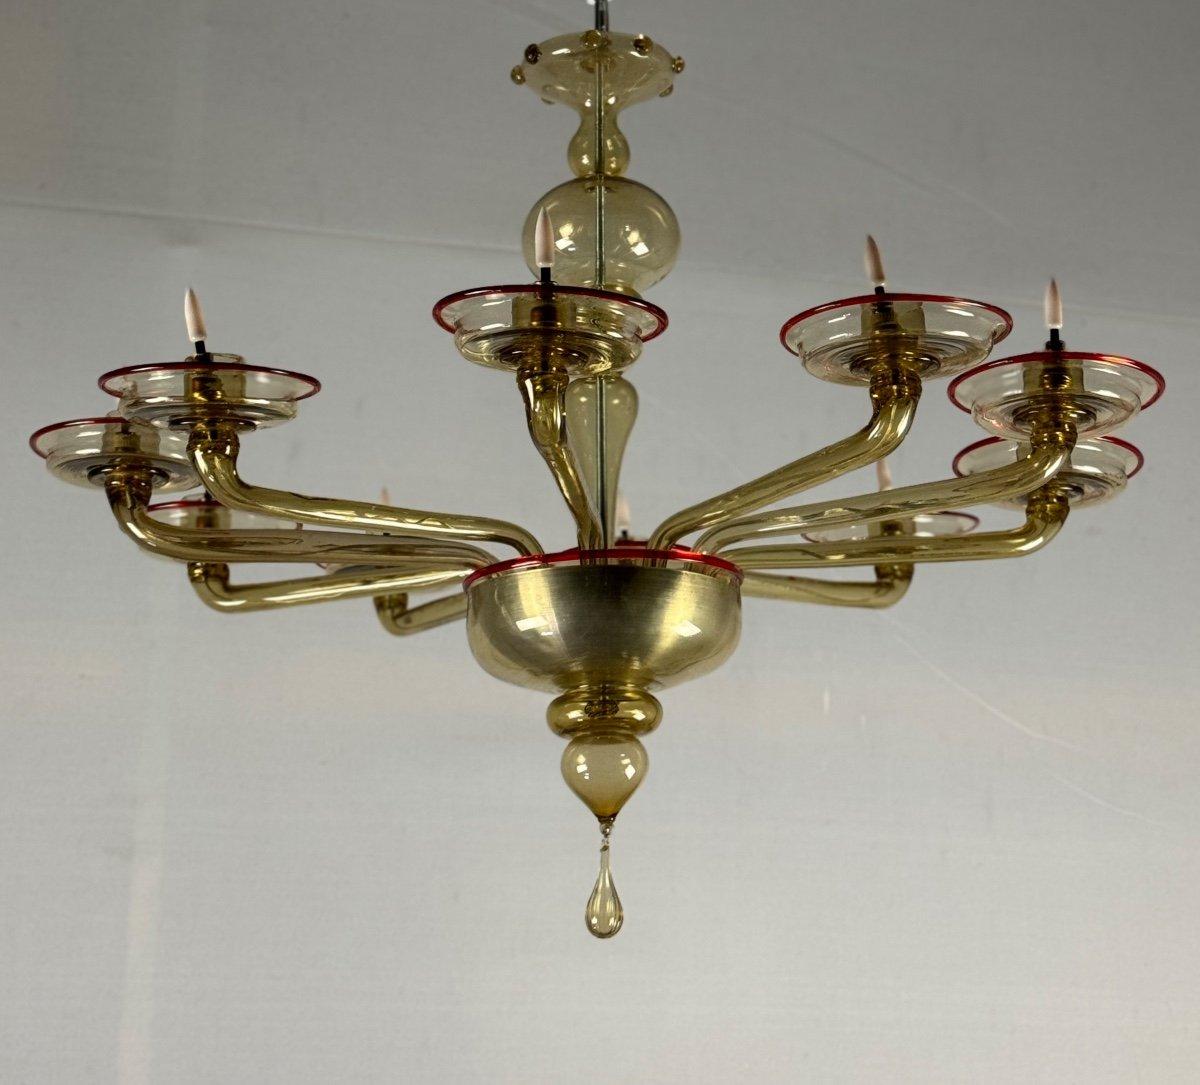 Venetian Chandelier In Mordore Murano Glass Highlighted With A Red line, 

Venini, 

10 arms of light, 

New wiring